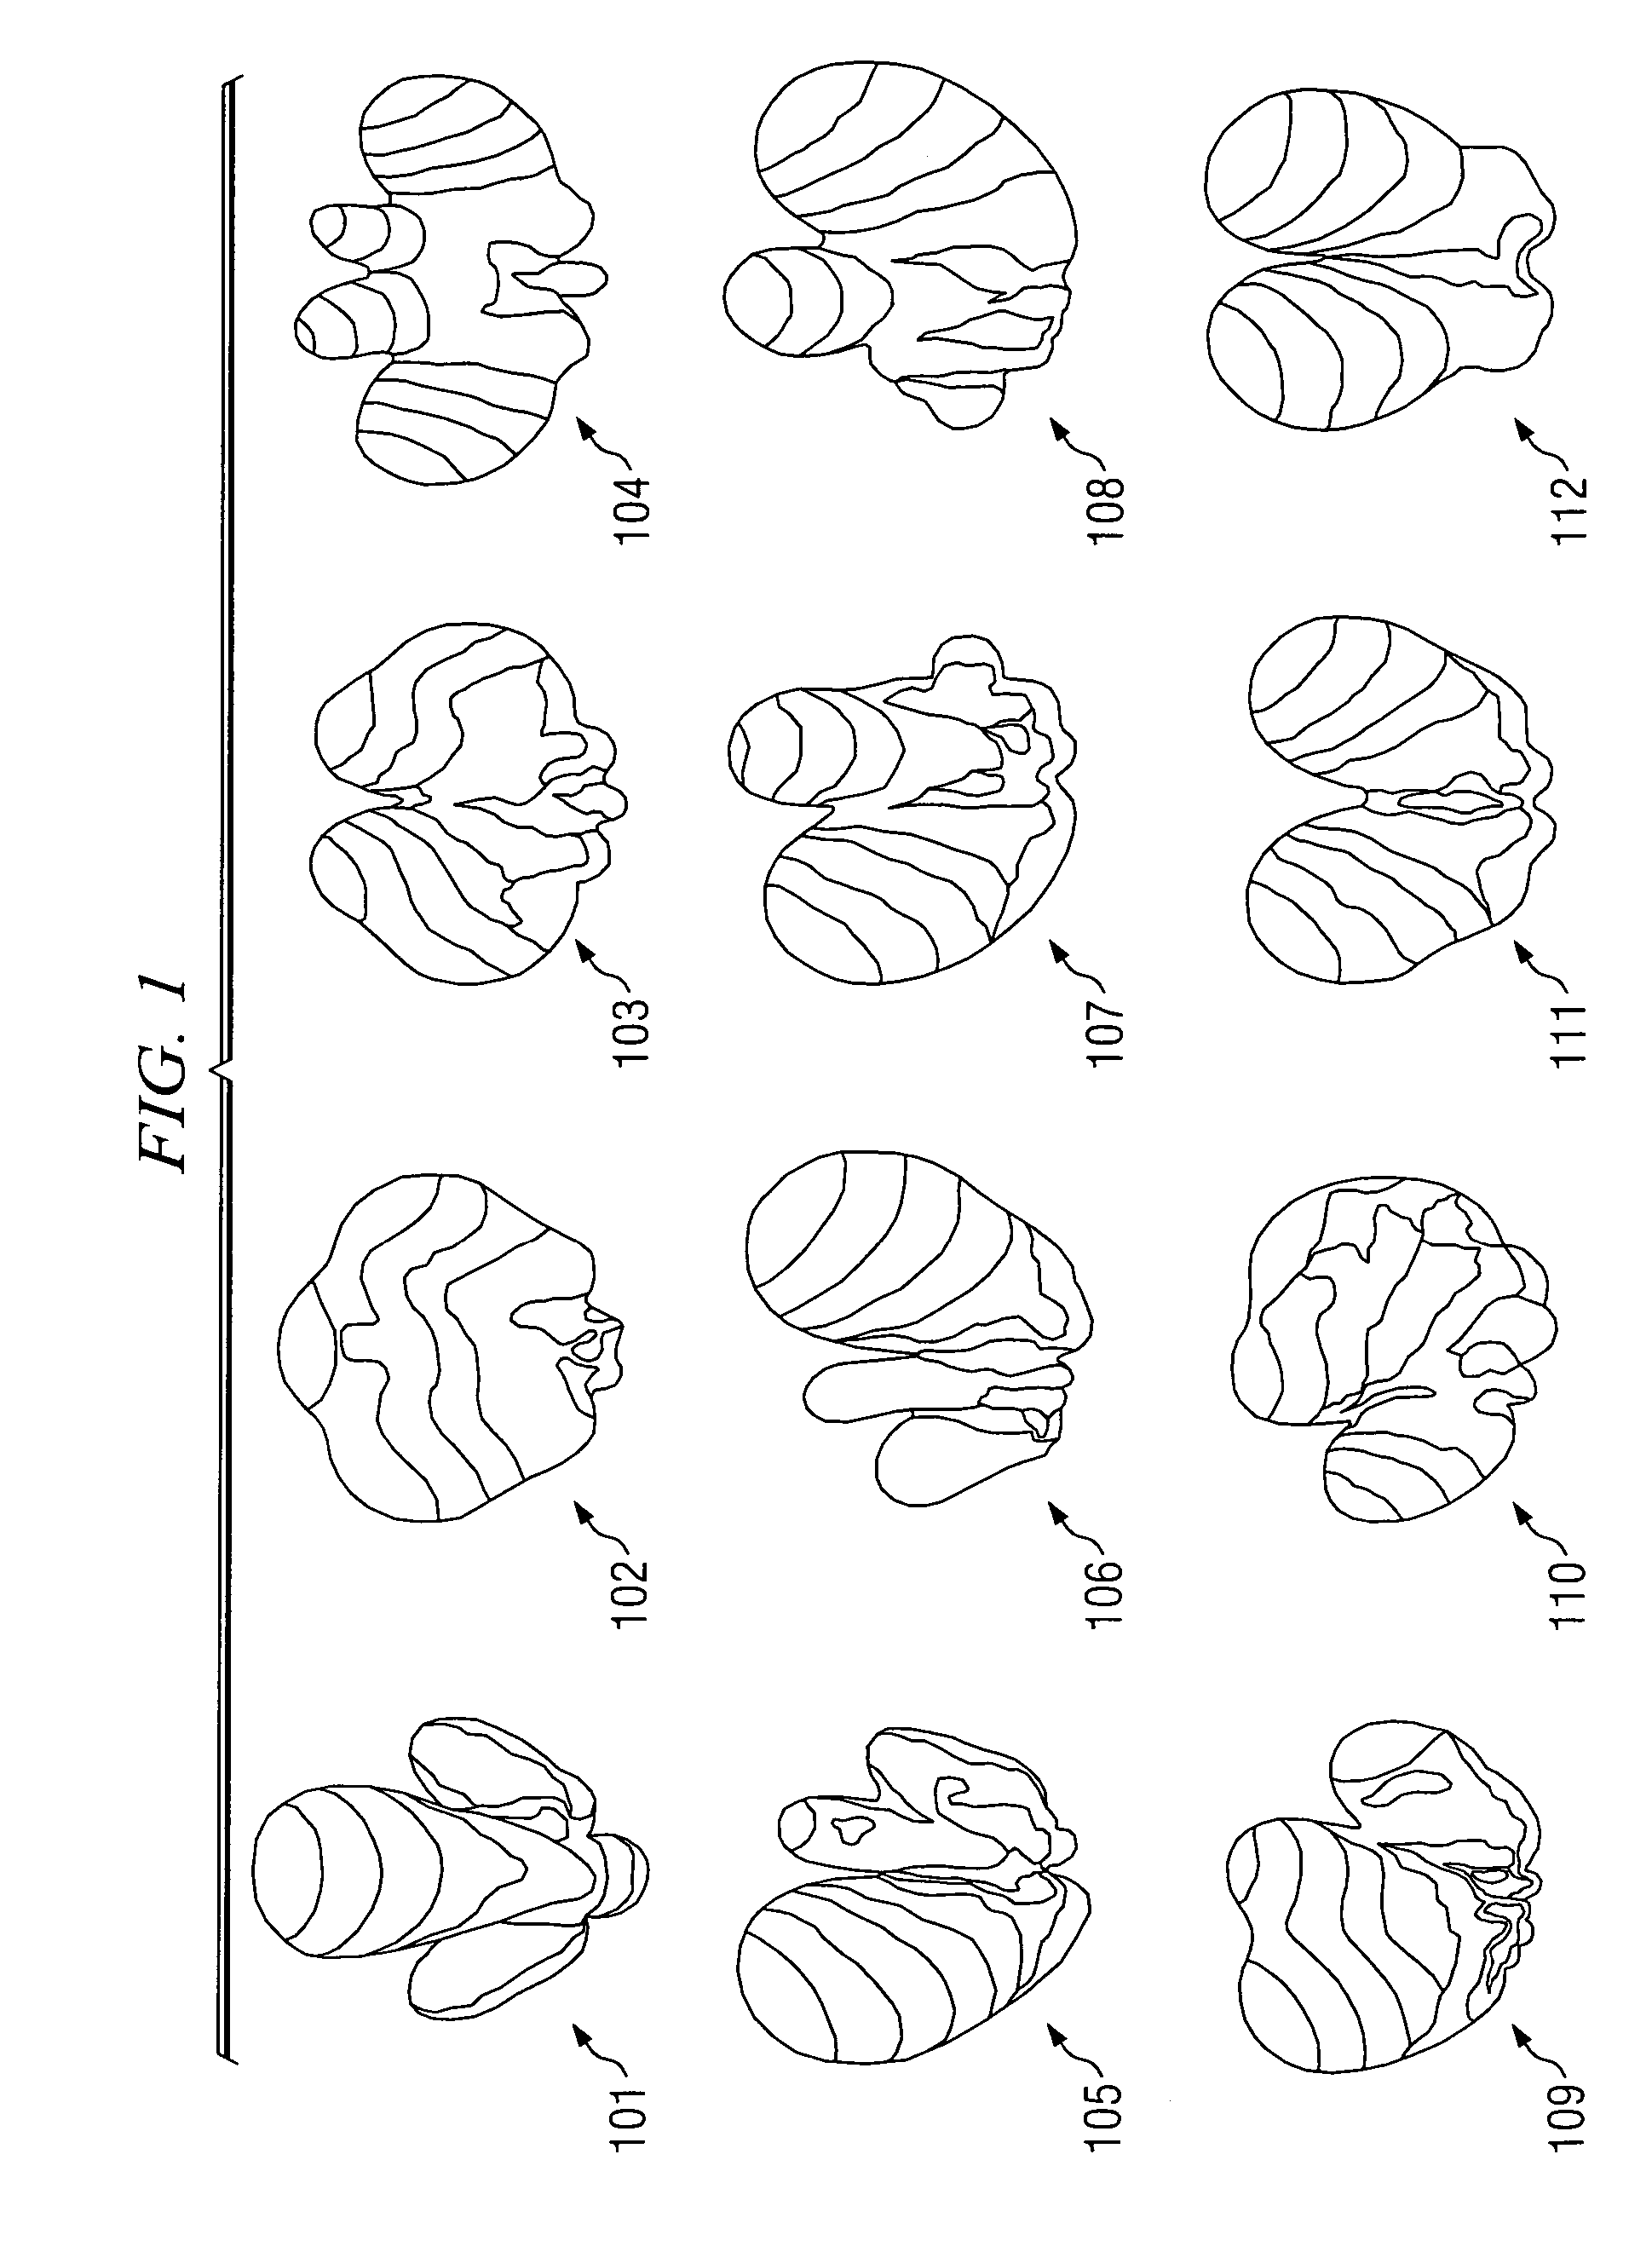 Low cost multi-beam, multi-band and multi-diversity antenna systems and methods for wireless communications